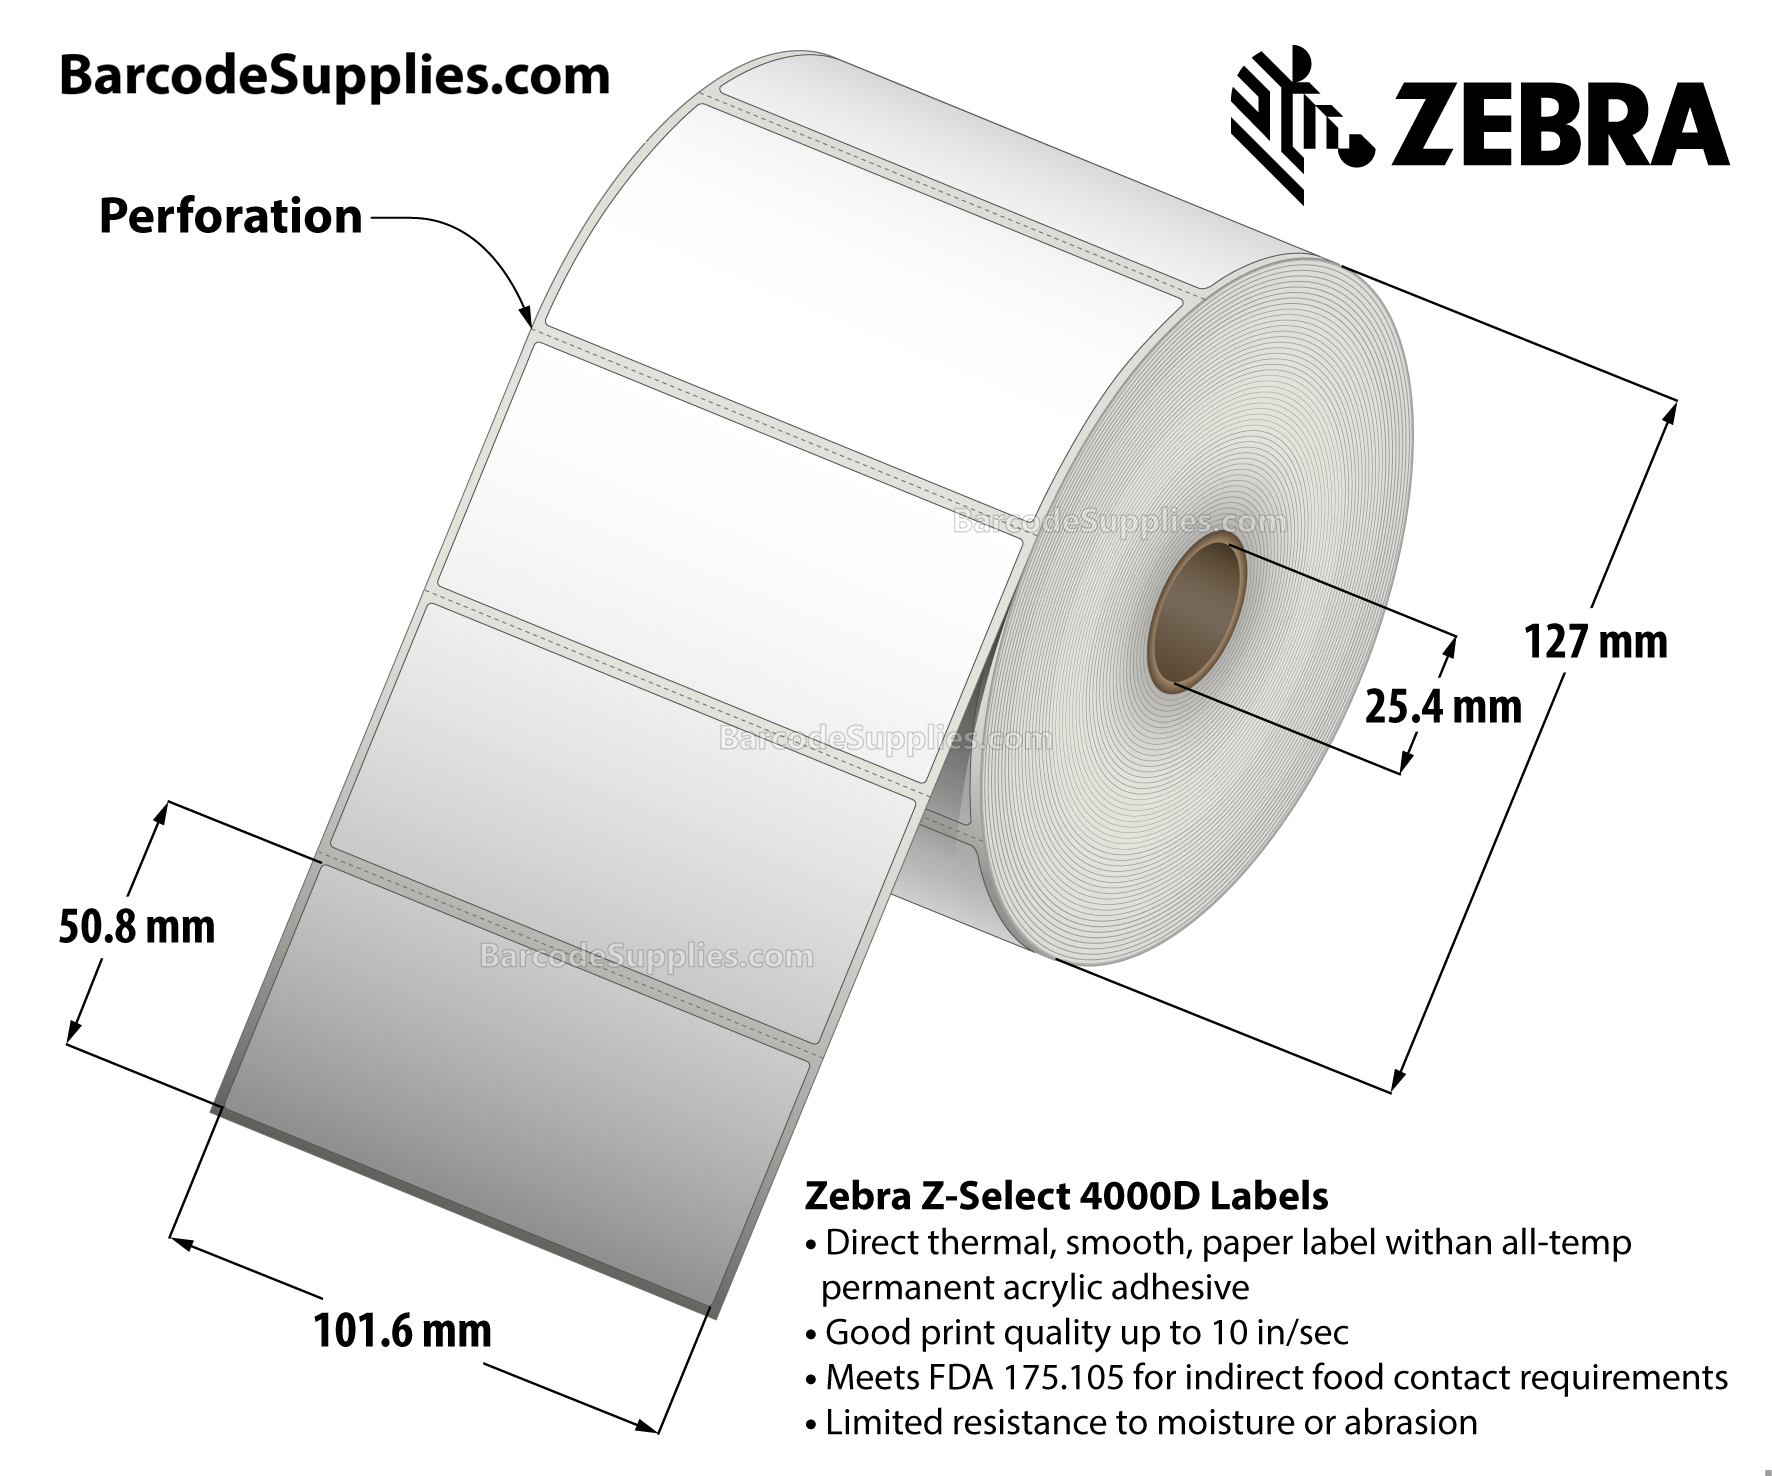 4 x 2 Direct Thermal White Z-Select 4000D Labels With All-Temp Adhesive - Perforated - 1240 Labels Per Roll - Carton Of 6 Rolls - 7440 Labels Total - MPN: 10010047